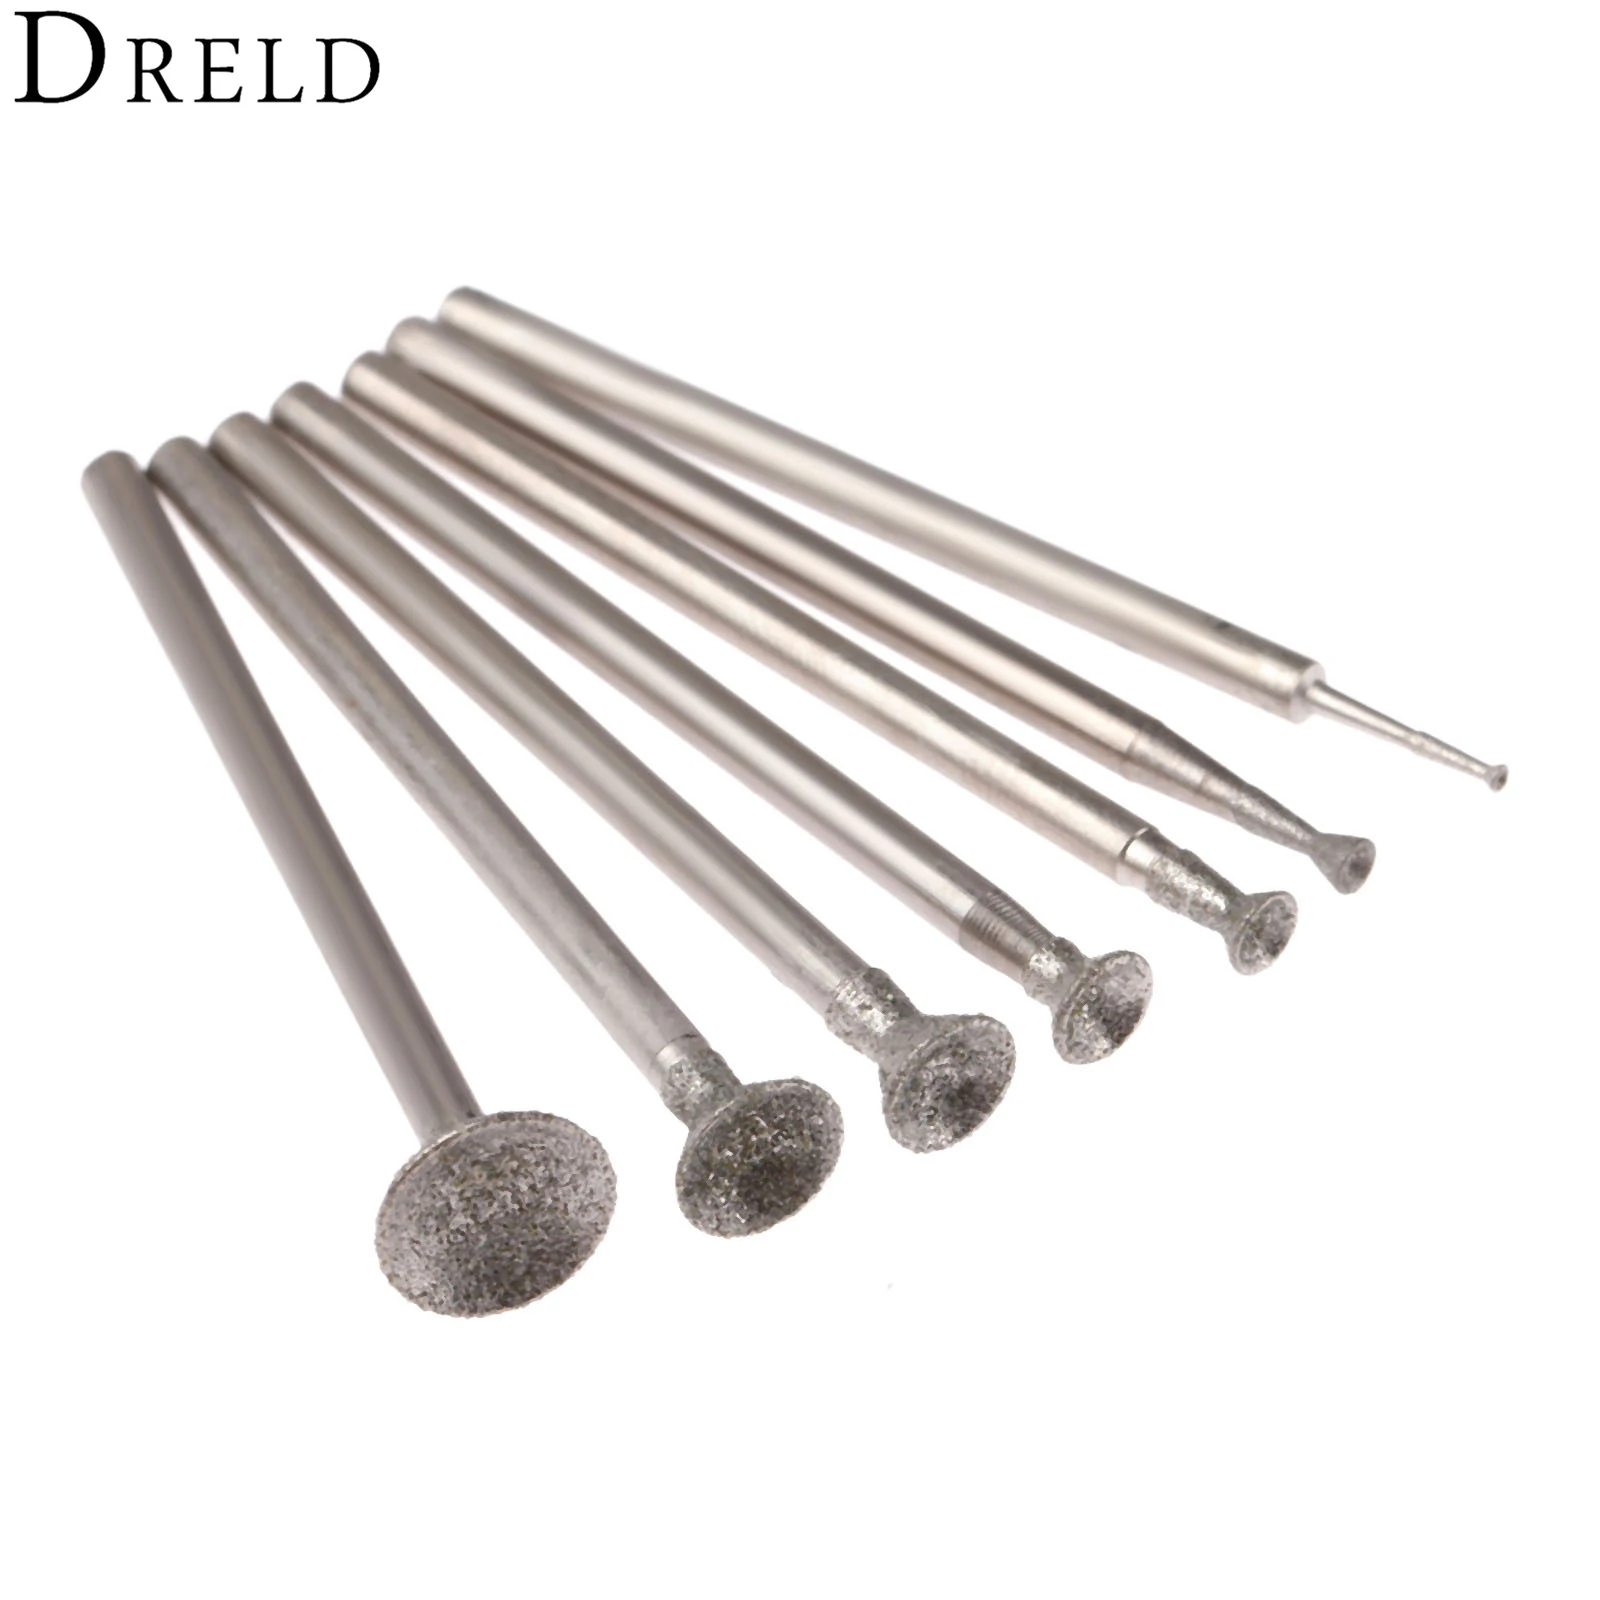 DRELD 7Pcs 1-8mm Diamond Grinding Head Mounted Points 2.35mm Shank Spherical Concave Jade Carving Burrs for Dremel Rotary Tool